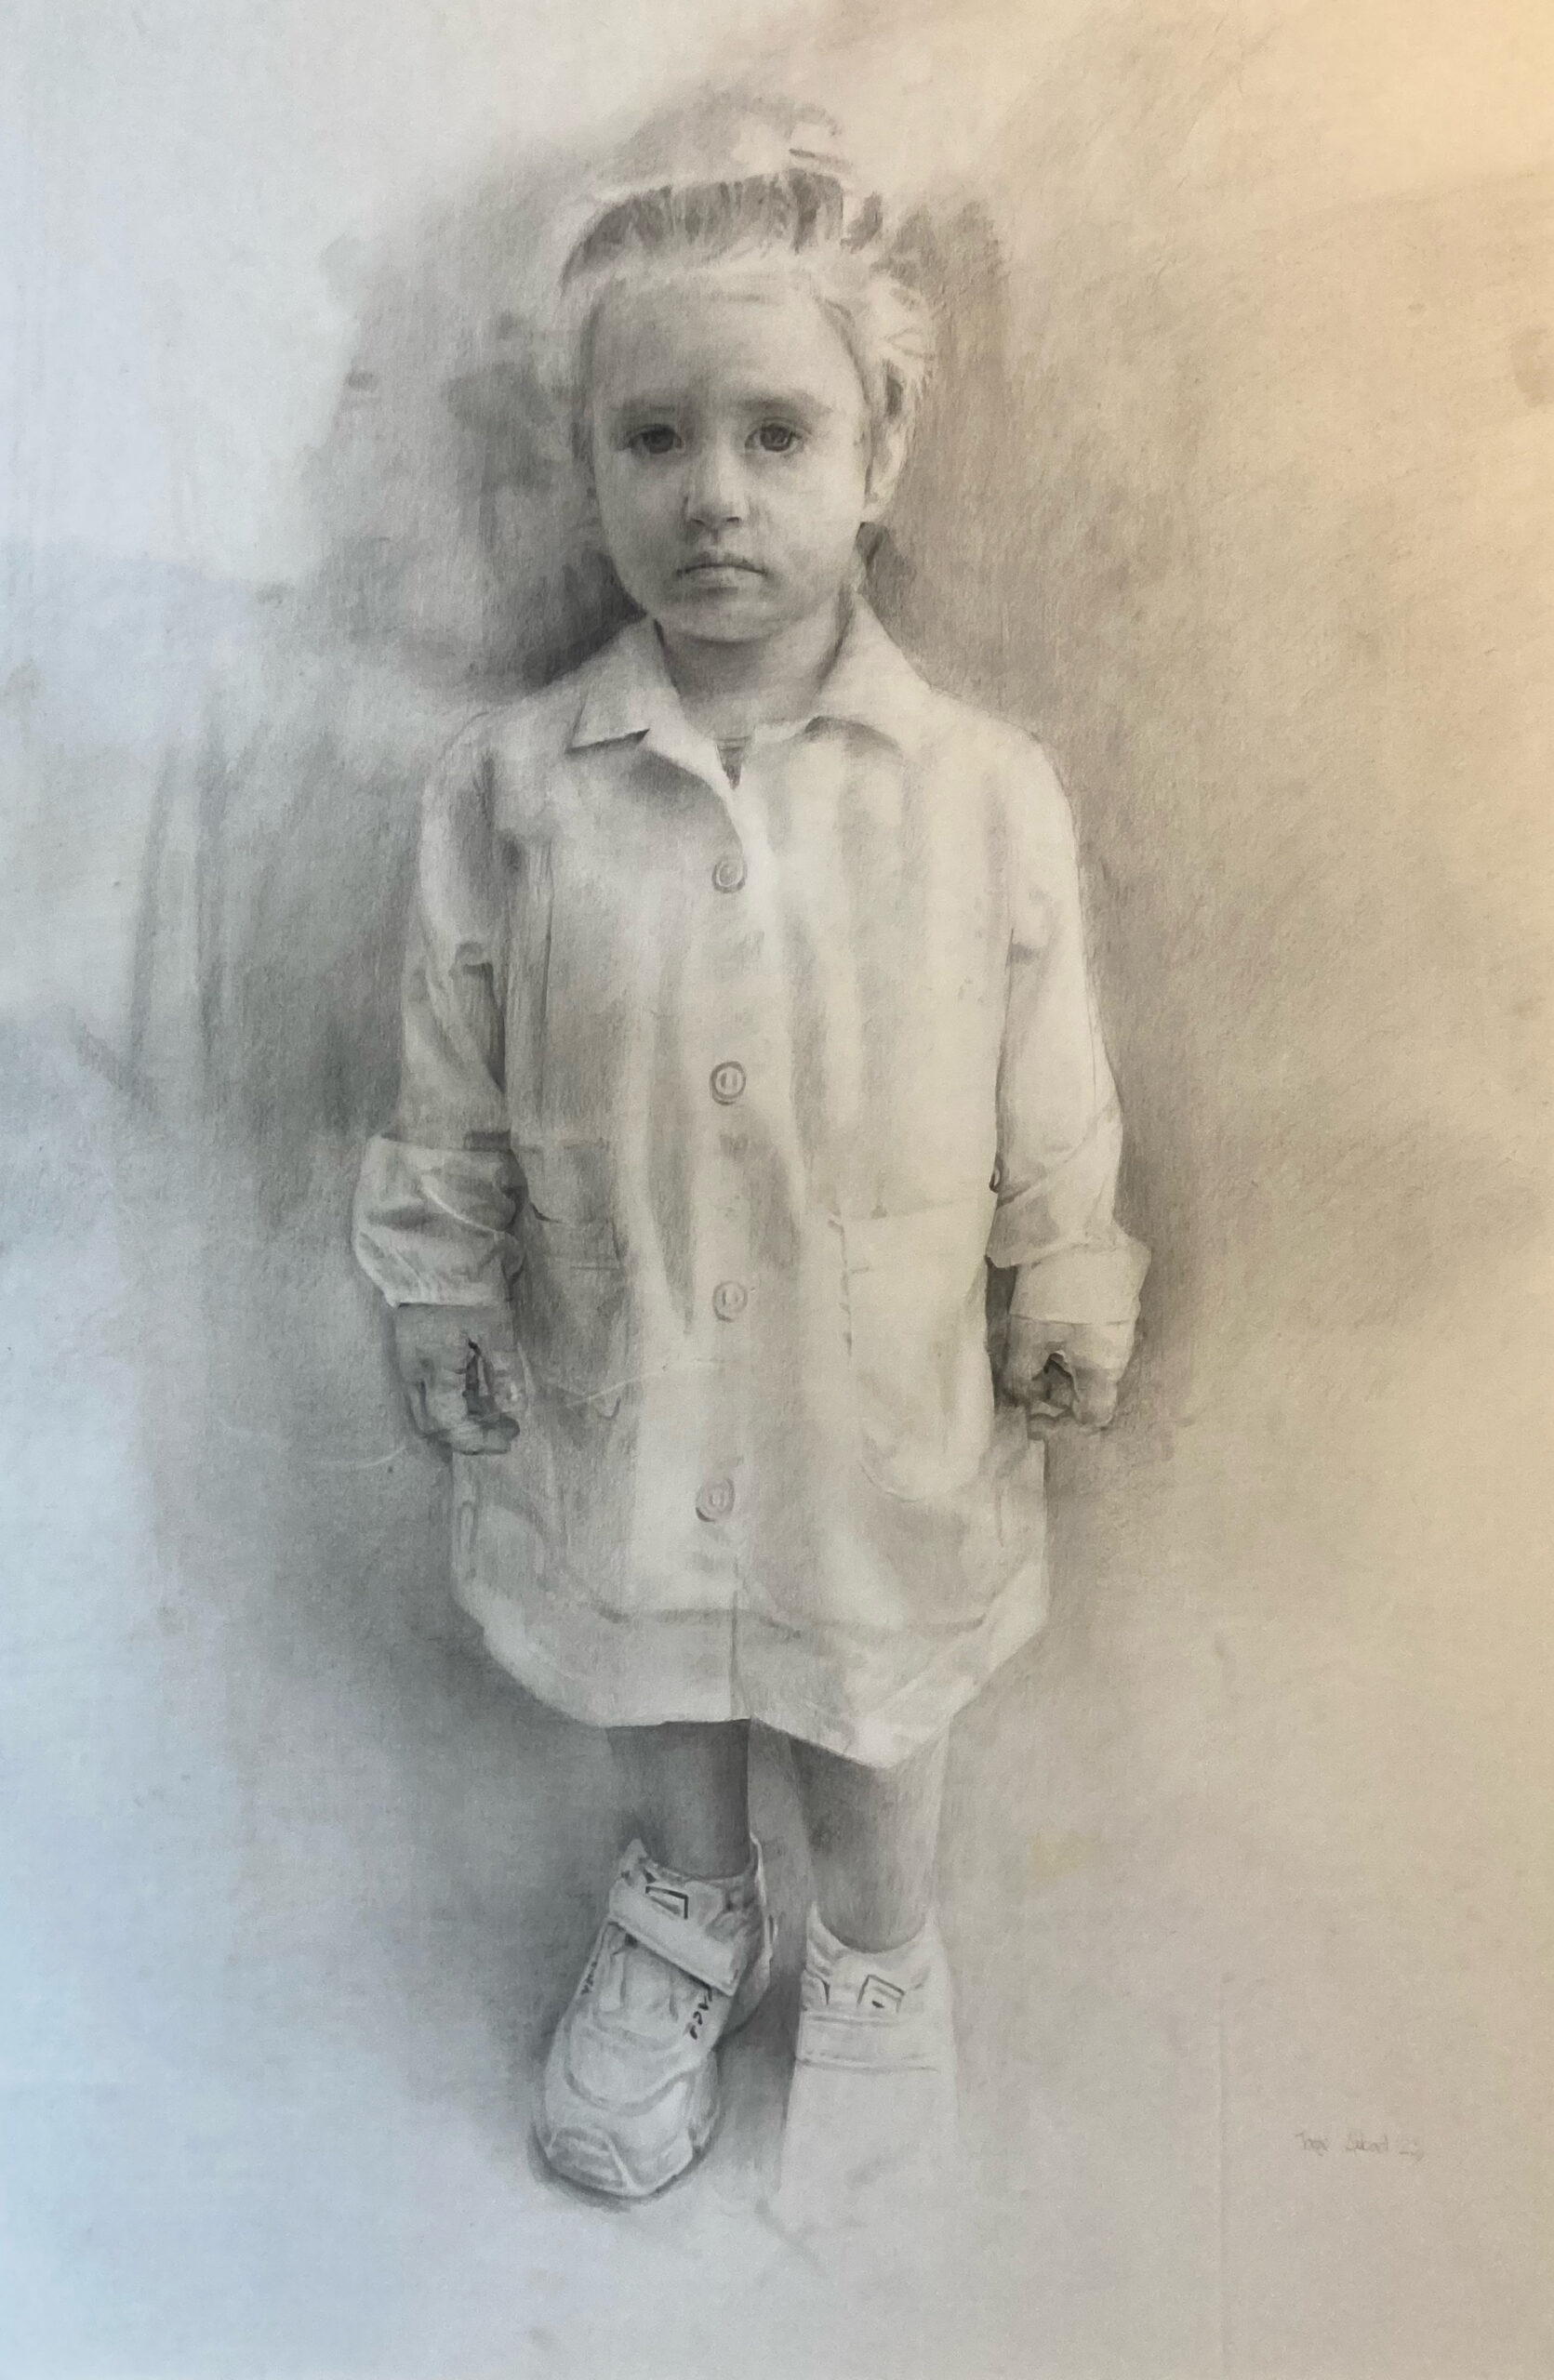 Graphite drawing of a child